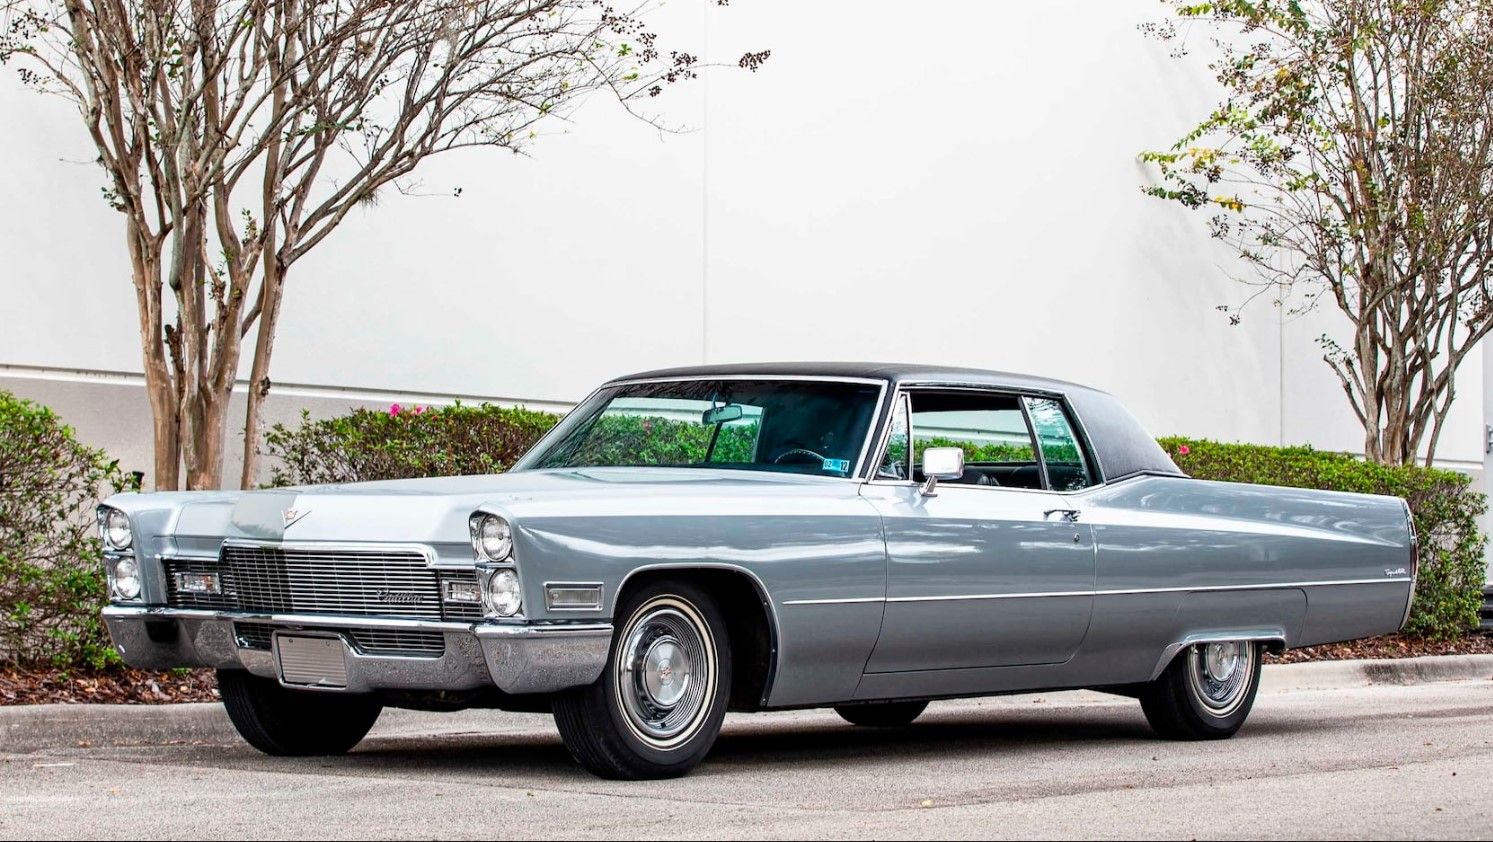 Pick of the Day: 1968 Cadillac Coupe DeVille in preserved condition